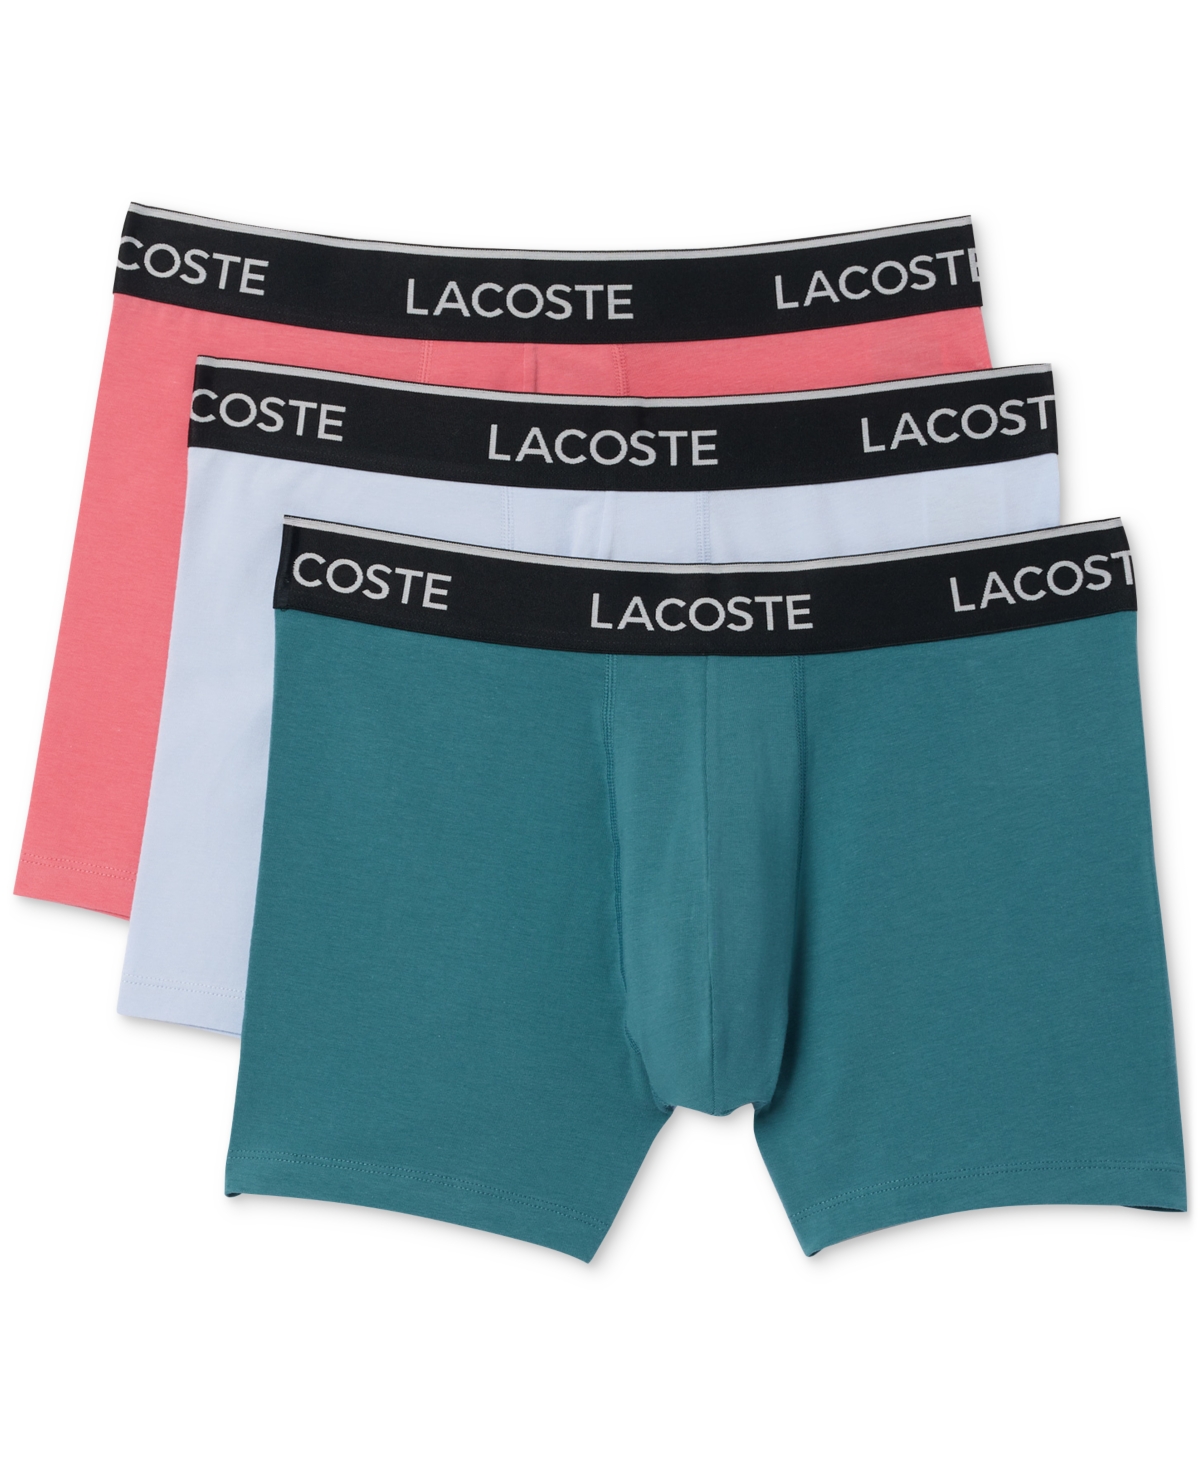 Lacoste Men's Casual Stretch Boxer Brief Set, 3 Pack In Blue